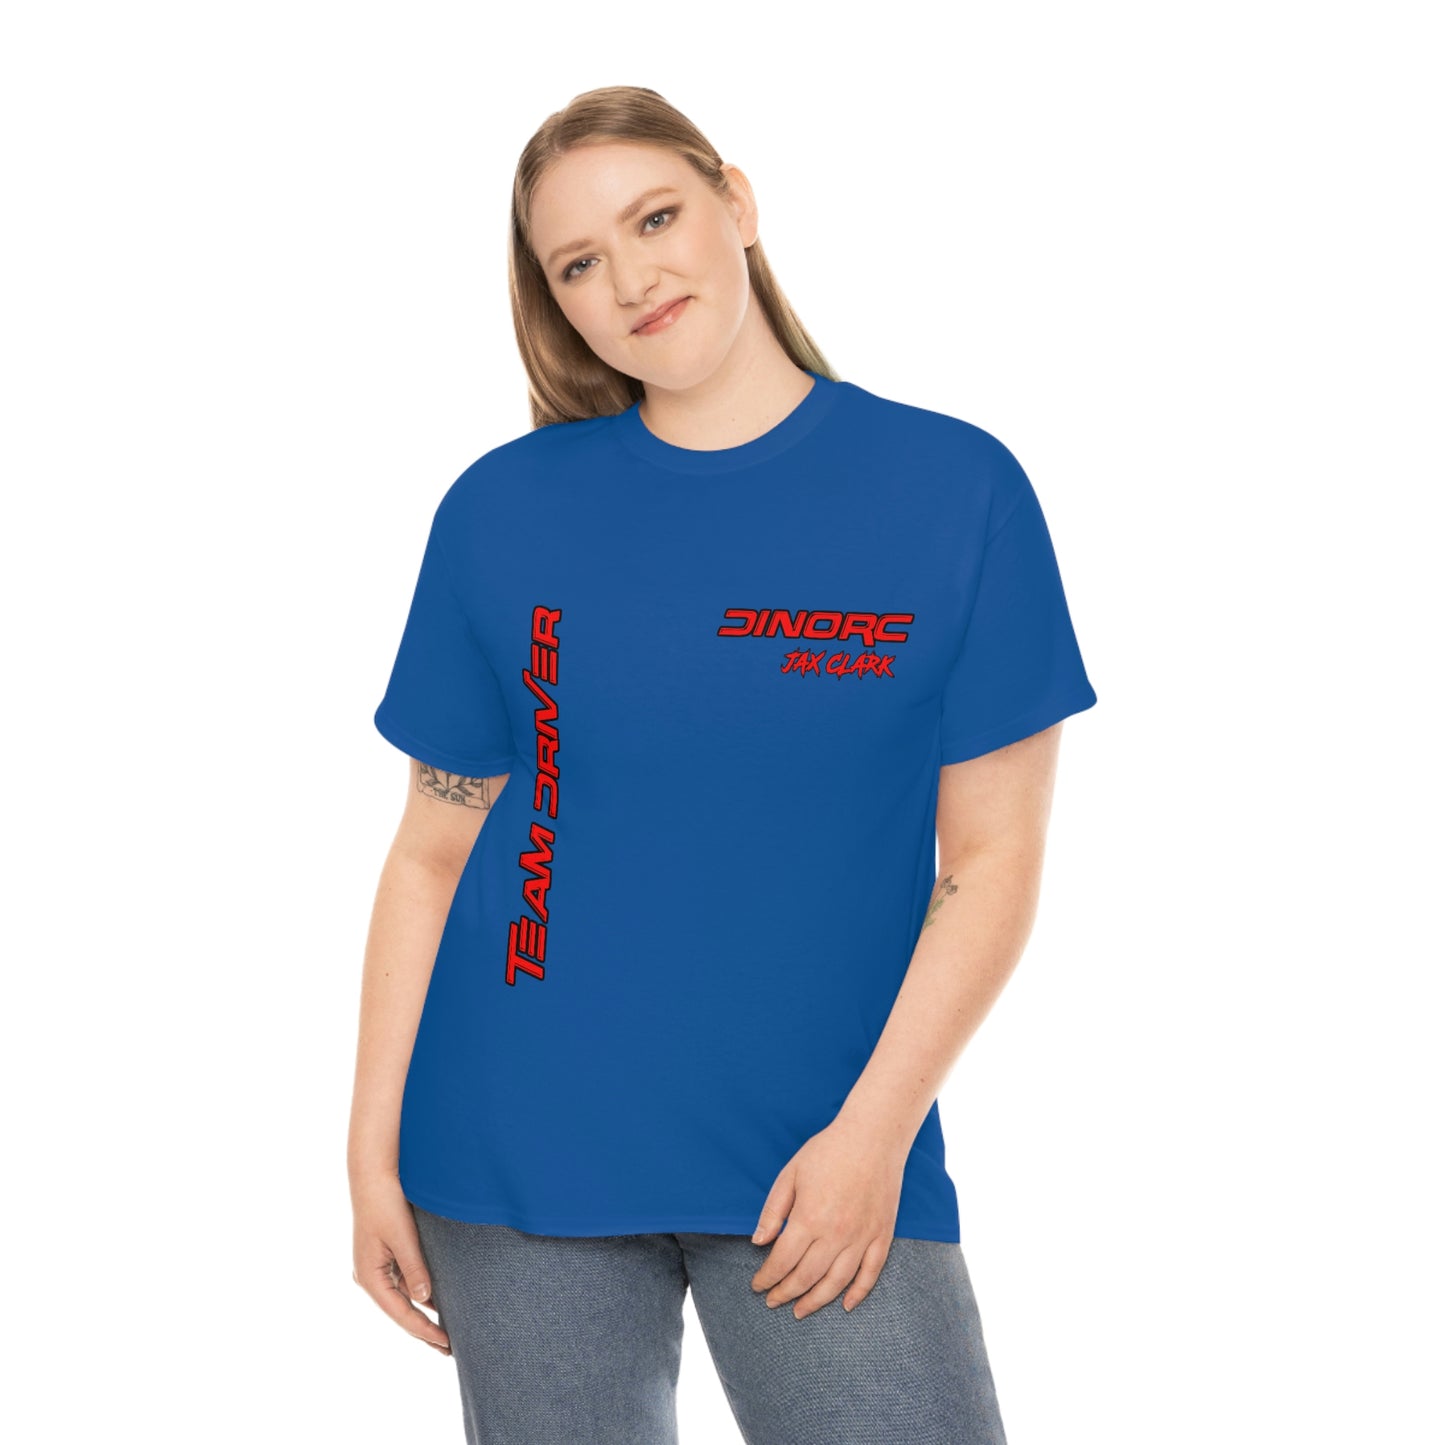 Team Driver Jax Clark Front and Back DinoRc Logo T-Shirt S-5x 5 colors